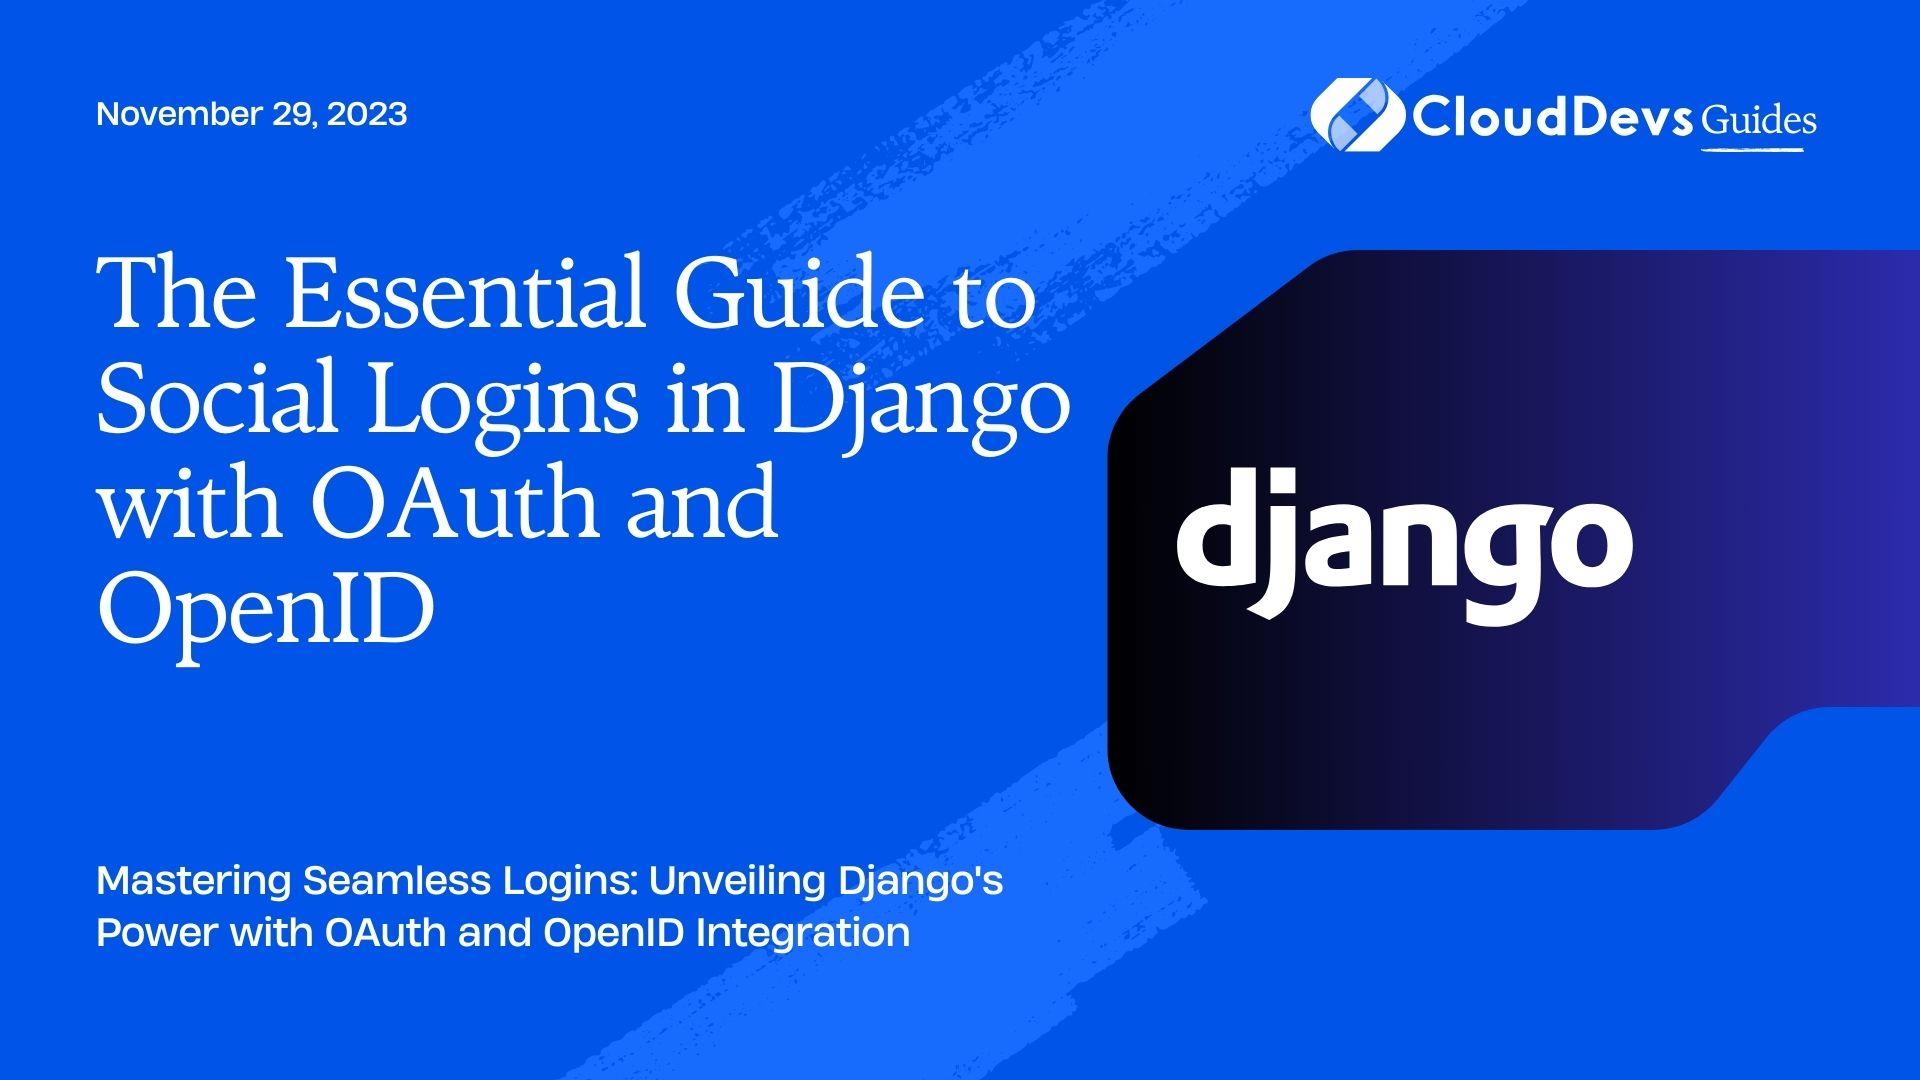 The Essential Guide to Social Logins in Django with OAuth and OpenID